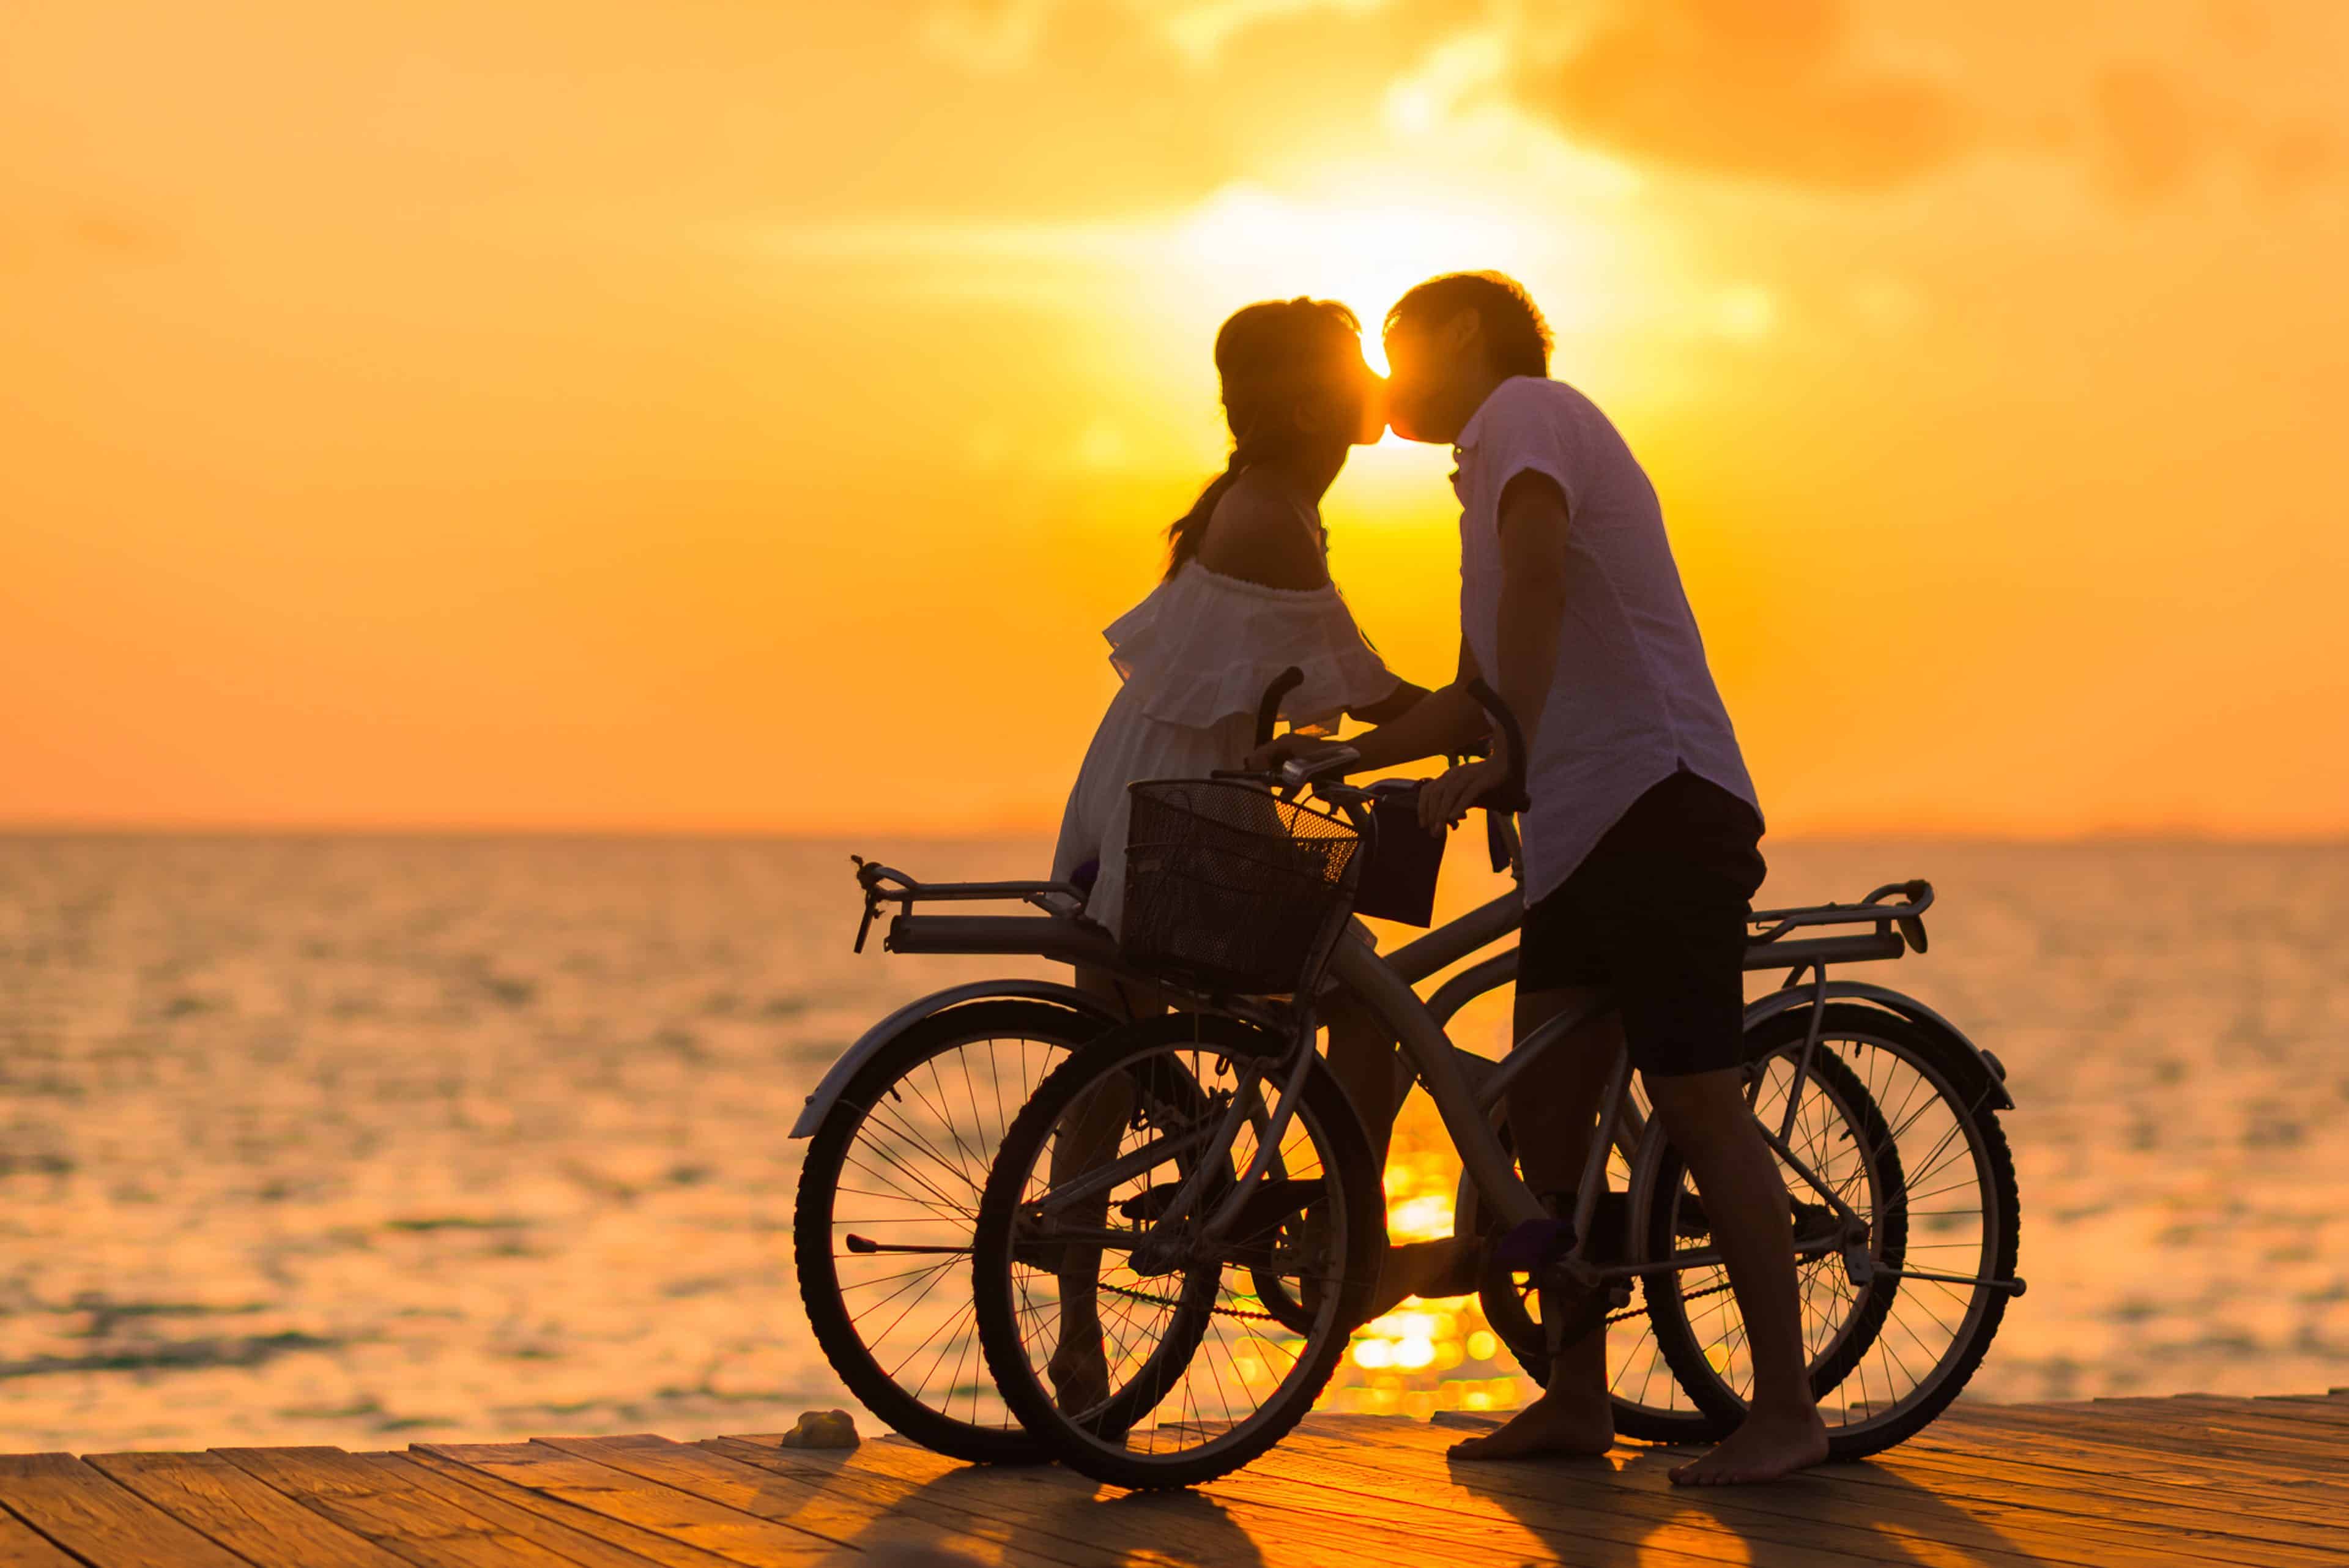 A couple stops to have a kiss while on their bicycles at sunset